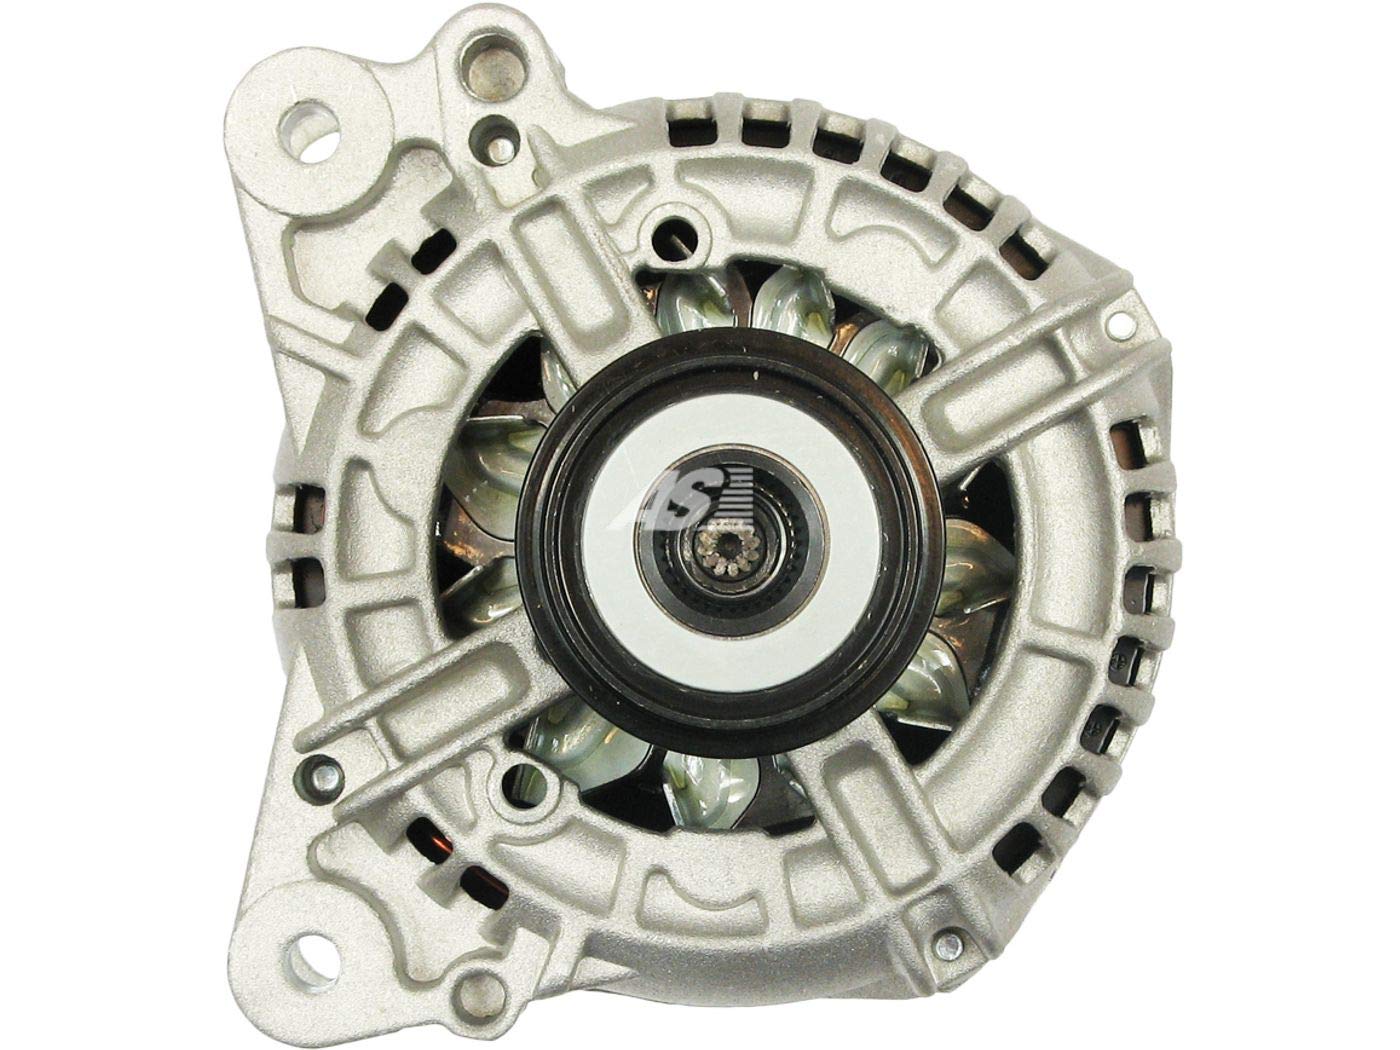 Brand new AS-PL Alternator with Free Wheel Pulley - A0190(P) von AS-PL